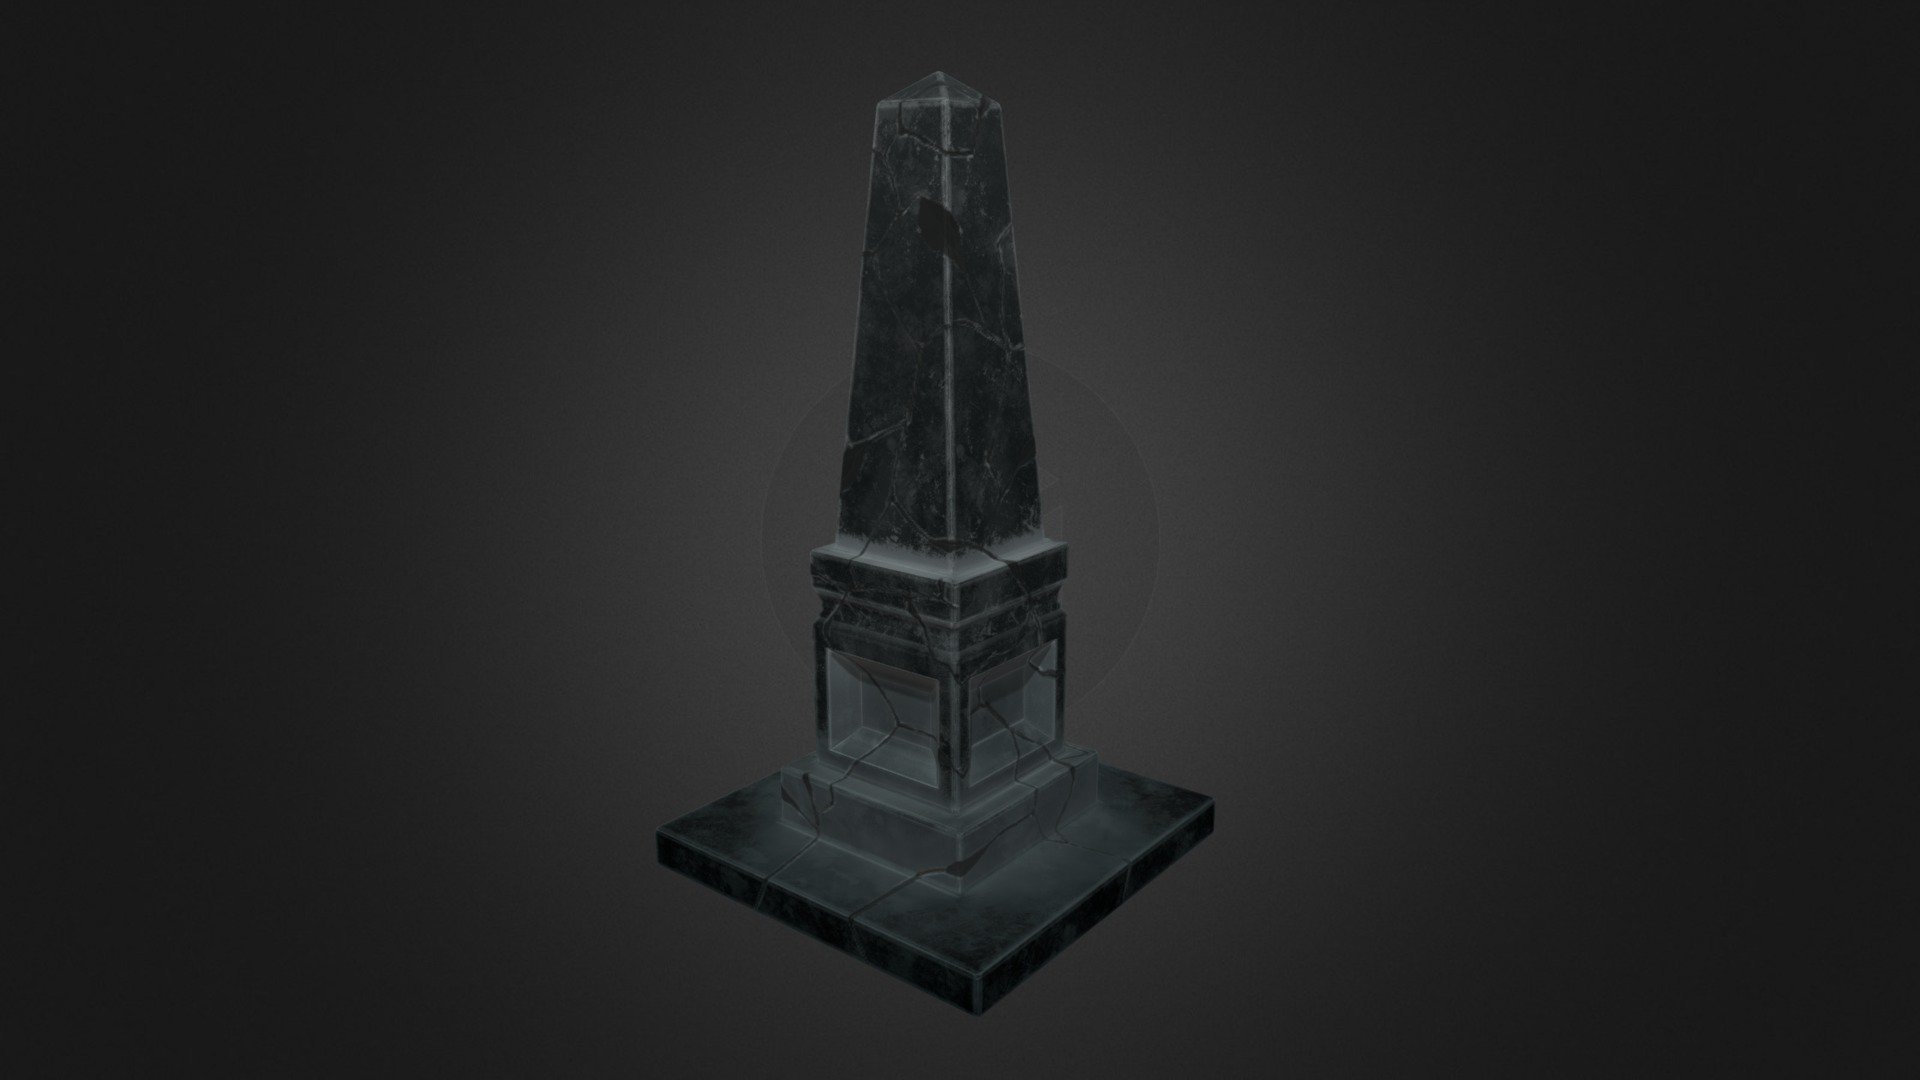 These assets were created for the Stylized Graveyard environment 3d model